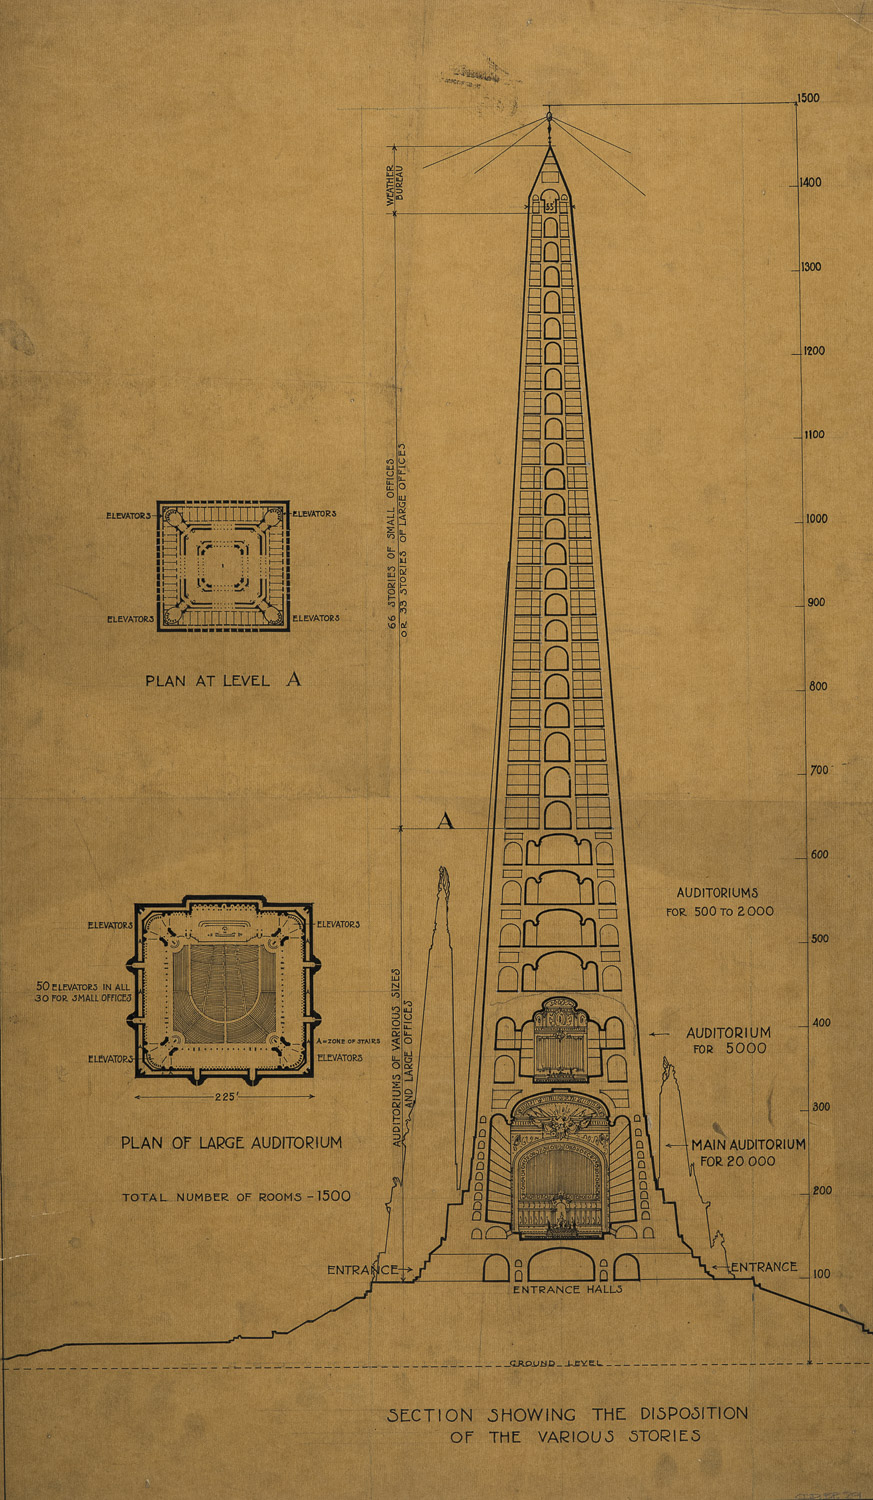 A composite black line drawing of one large section and two small floor plans. The section is of a large obelisk-shaped monument with a large theatre at the base and smaller rooms going all the way up. Labels to the left identify portions of the building, from bottom to top, as “Auditoriums of Various Sizes,” “66 Stories of Small Offices,” and “Weather Bureau.” A scale bar to the right shows that the tower is 1500 feet tall. On the left of the drawing are two small floor plans showing the symmetrical auditorium and a typical office level with many small rooms.